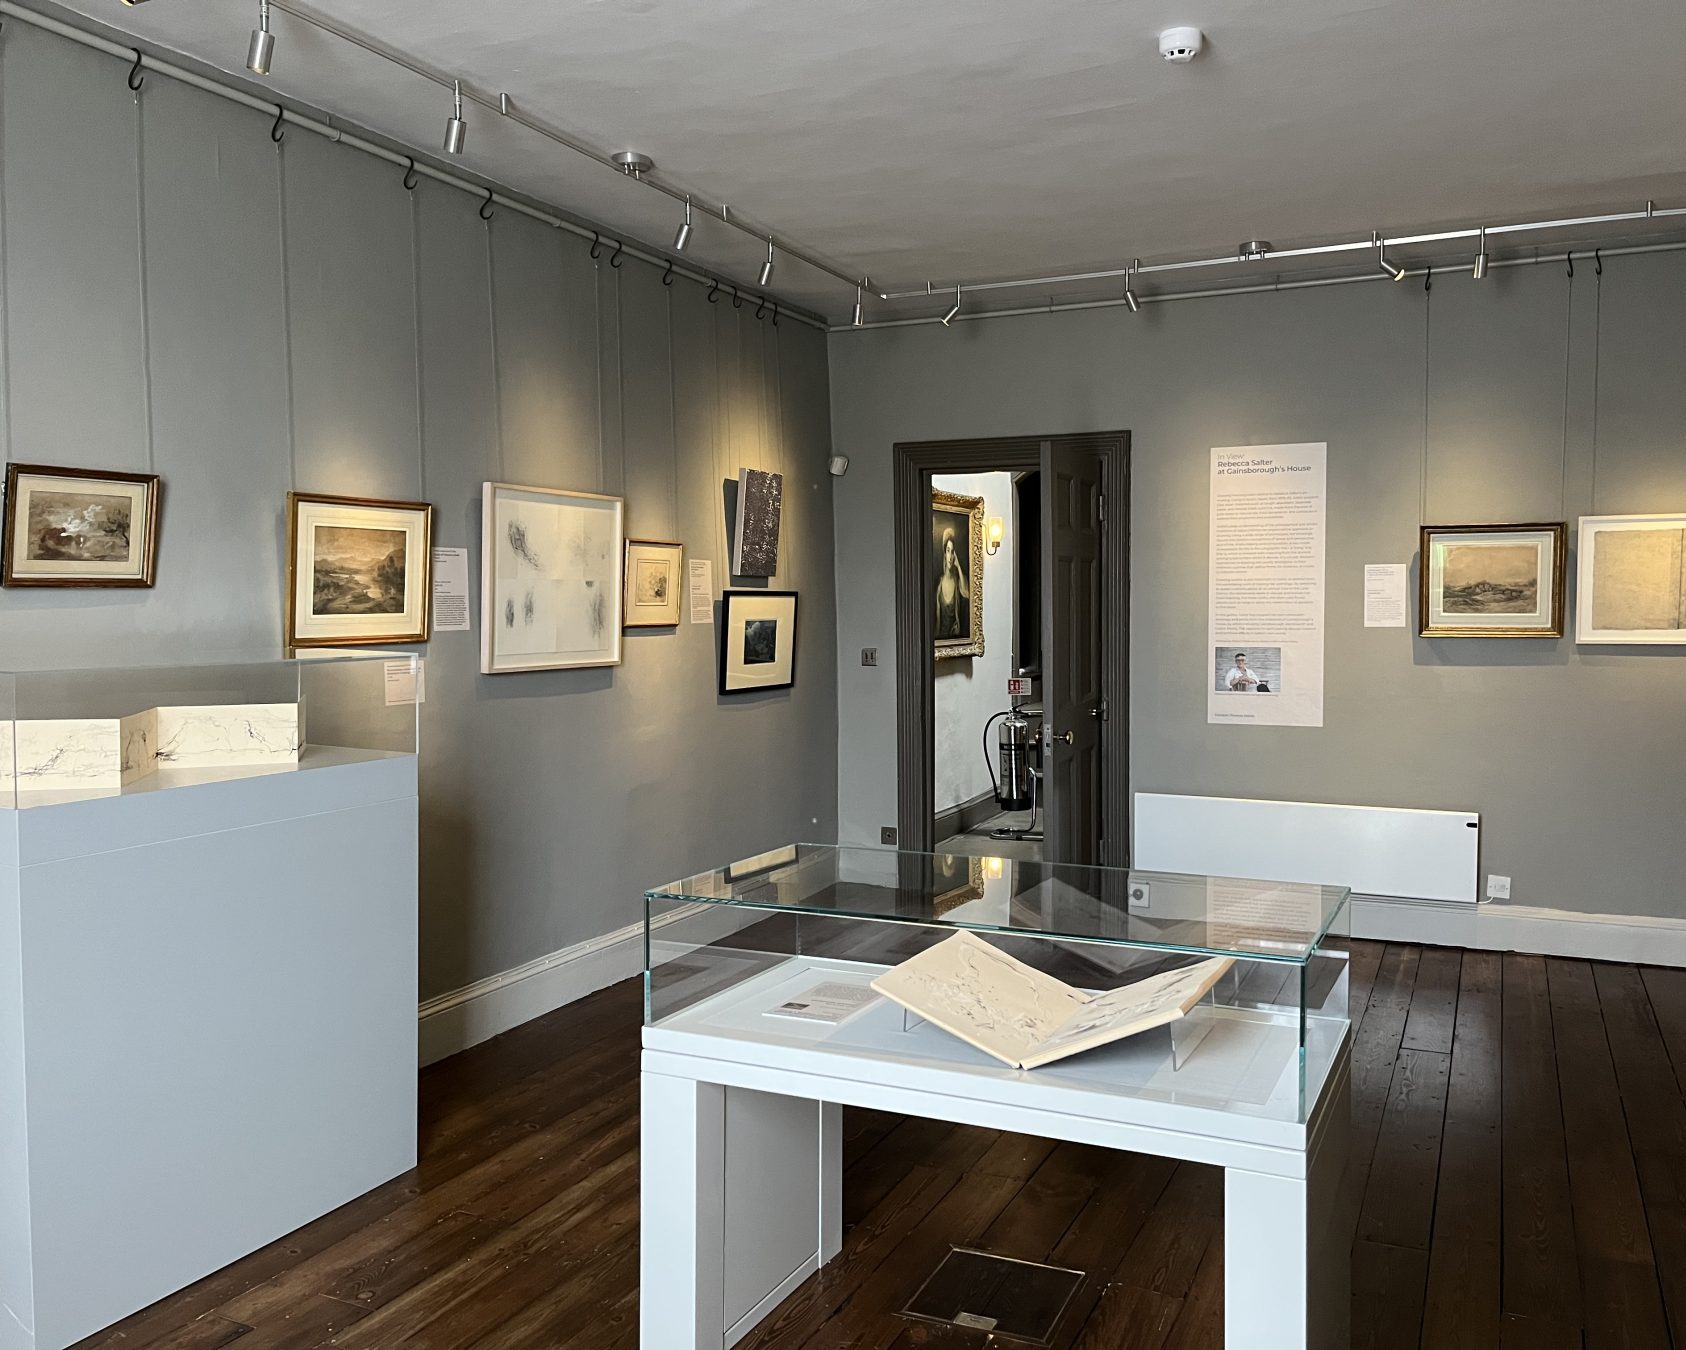 An image of the David Pike Drawings Gallery with the exhibition, In View: Rebecca Salter at Gainsborough's House.